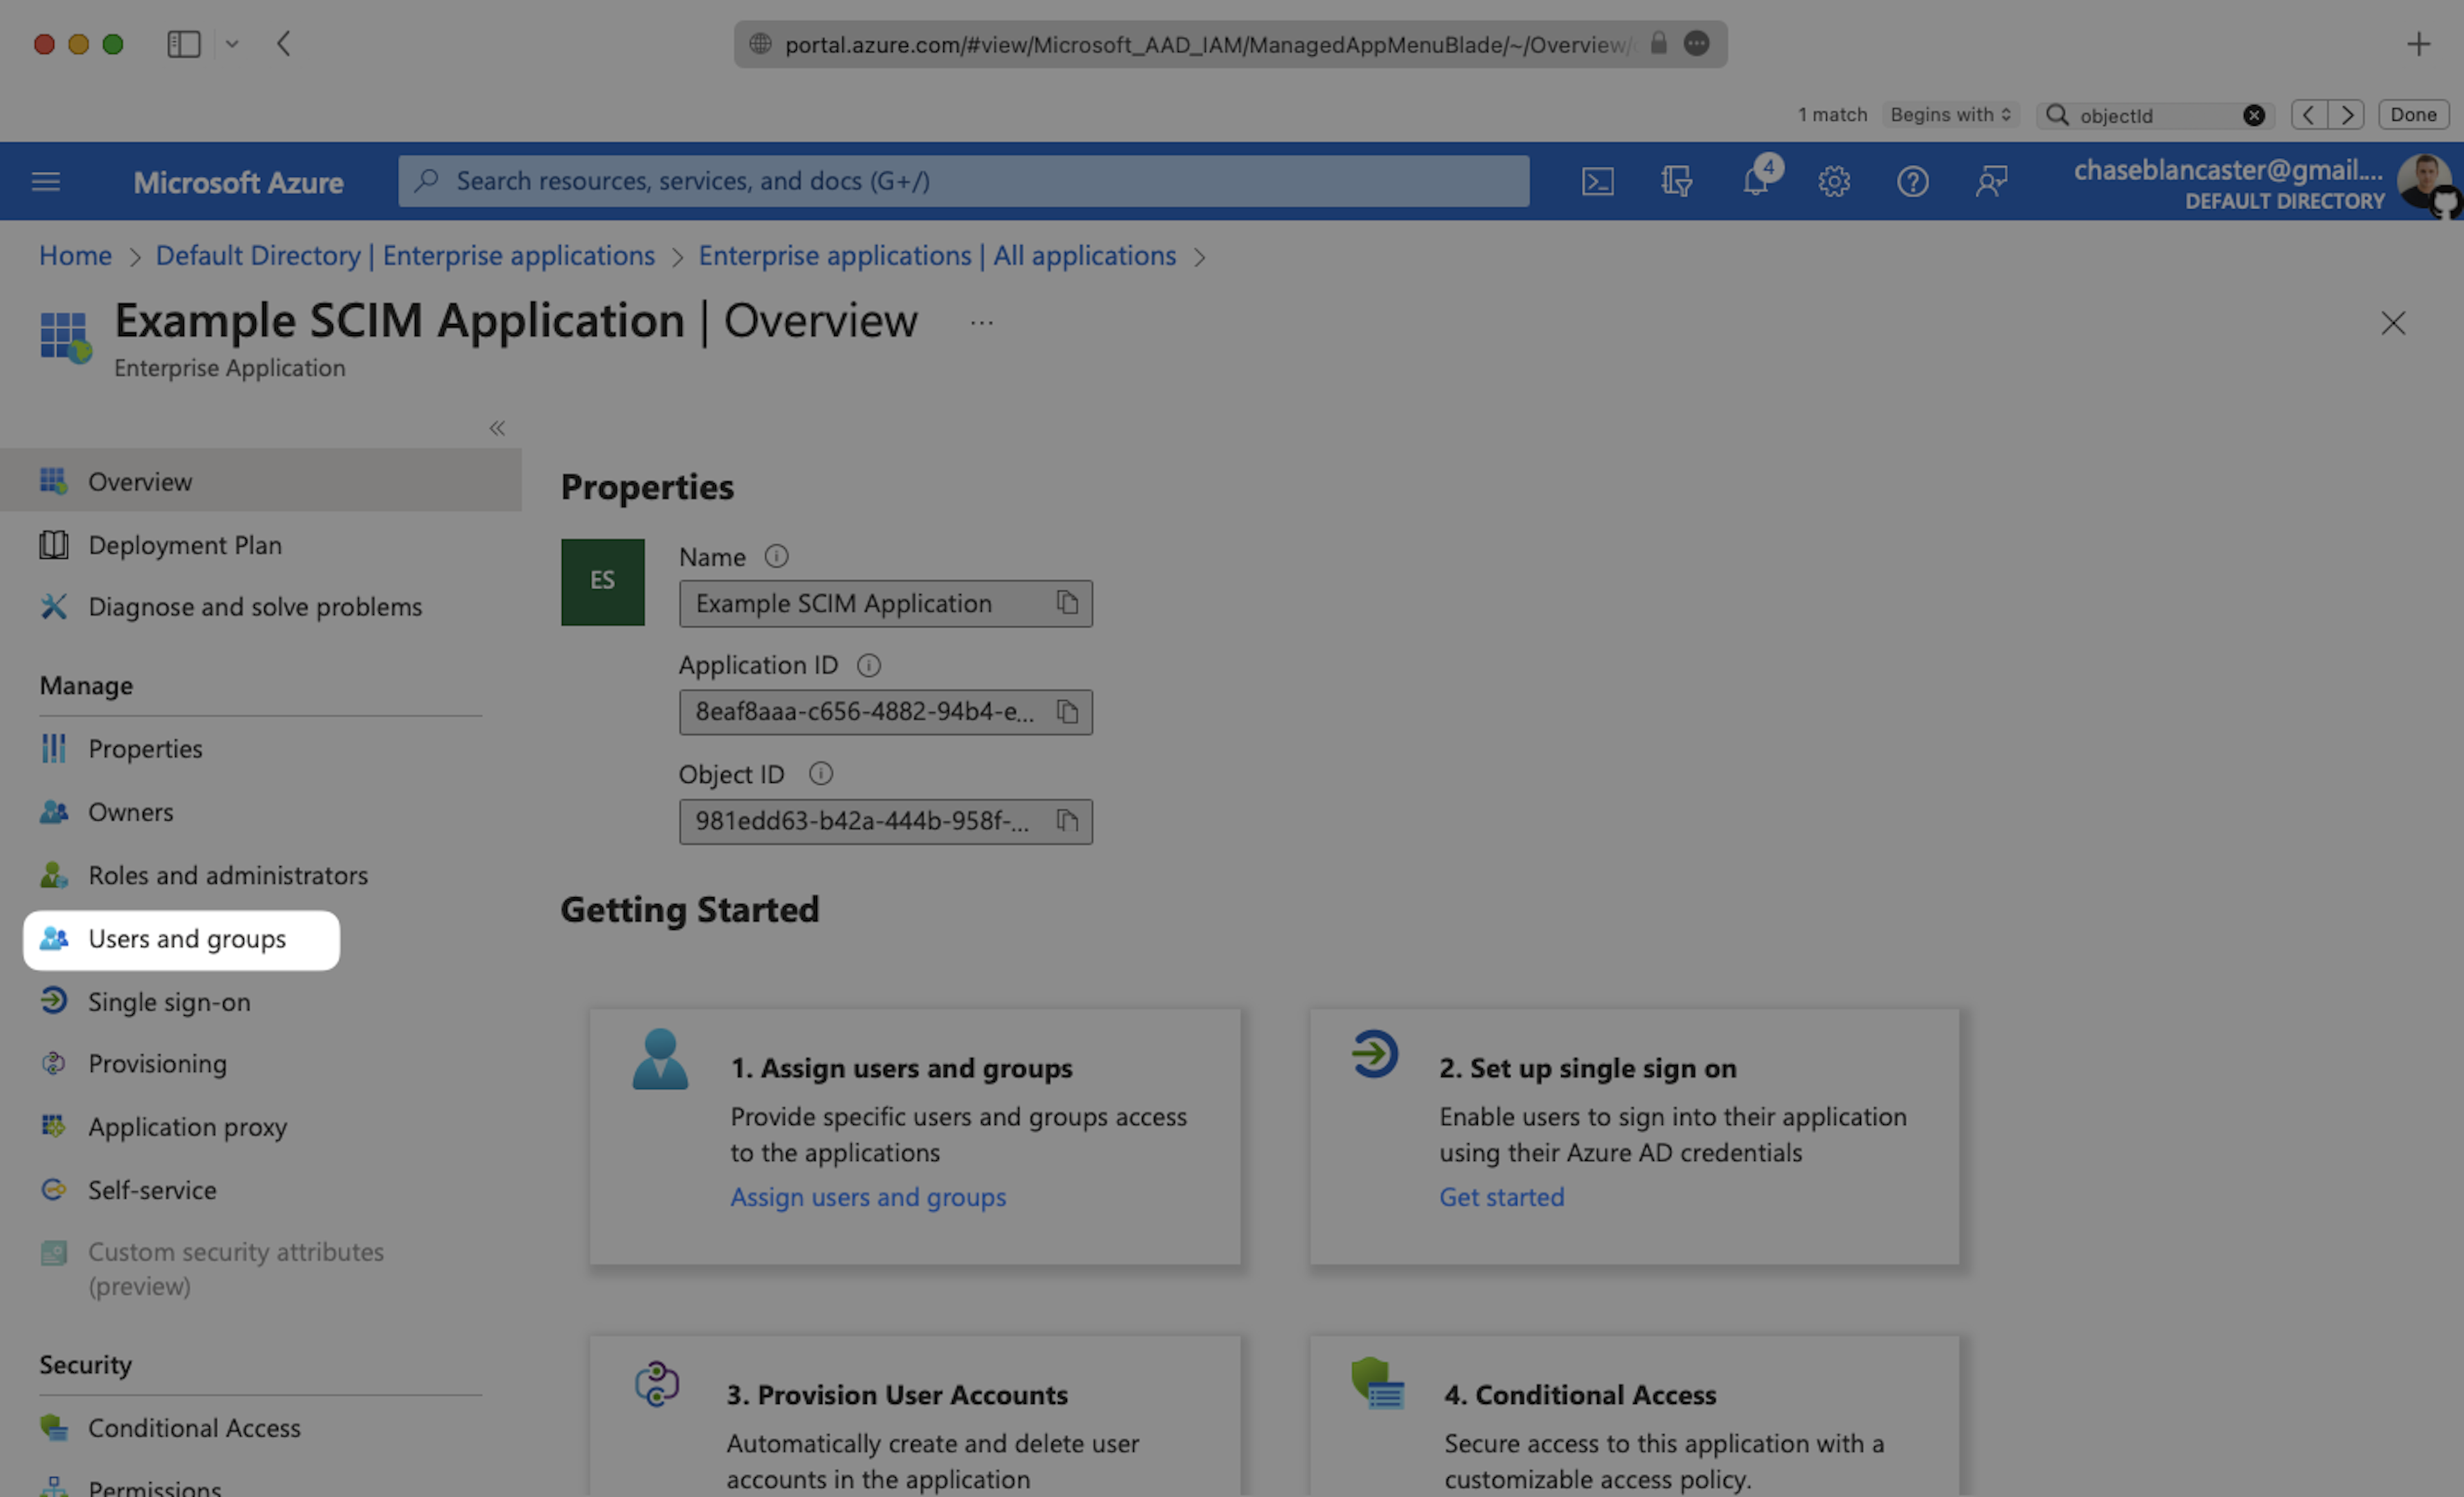 A screenshot showing where to navigate to 'Users and groups' from the 'Manage' section in Azure.